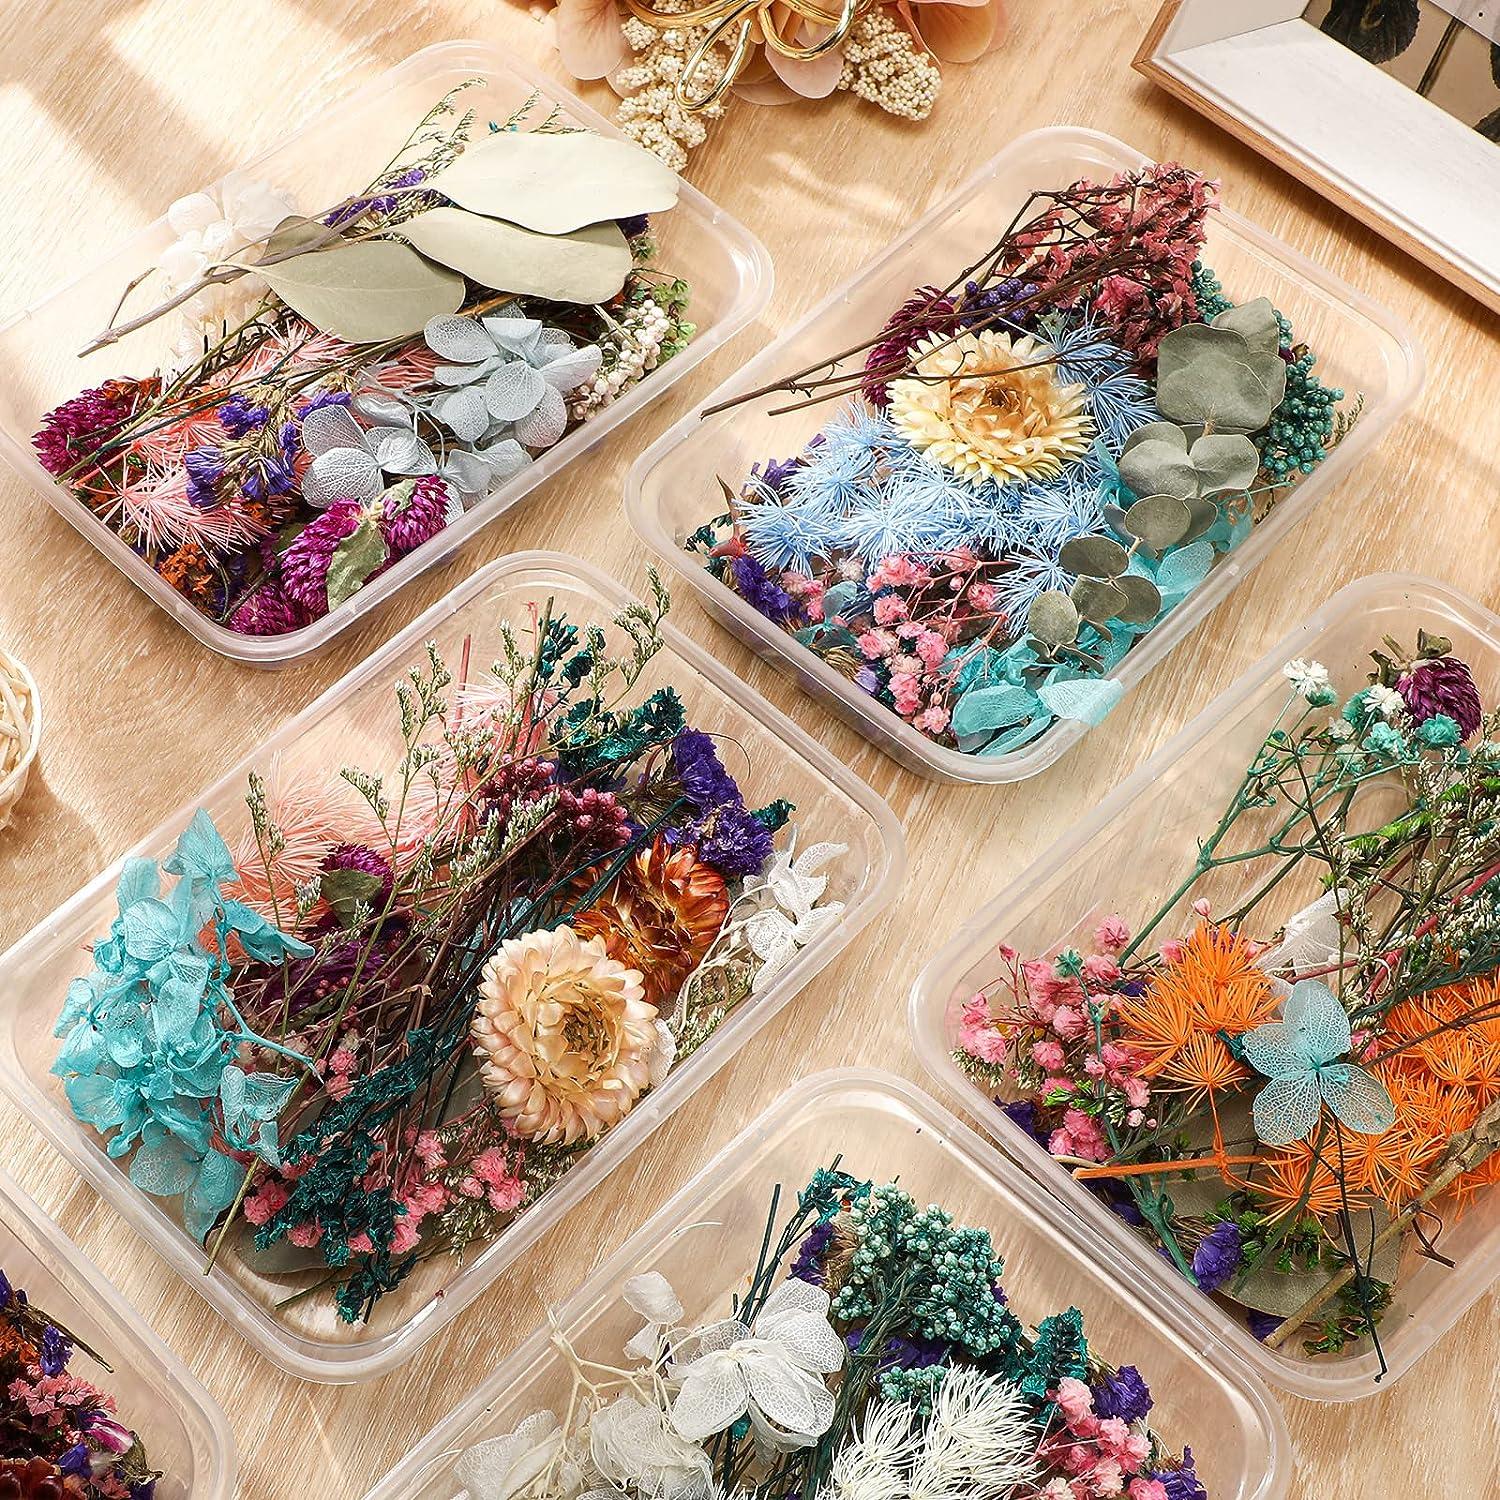 Coume 6 Boxes Dried Flowers for Resin Mixed Pressed Dry Flower Leaves  Multiple Natural Real Mini Crafts Colorful Handmade Plants Soap DIY Jewelry  Pendant Floral Decors